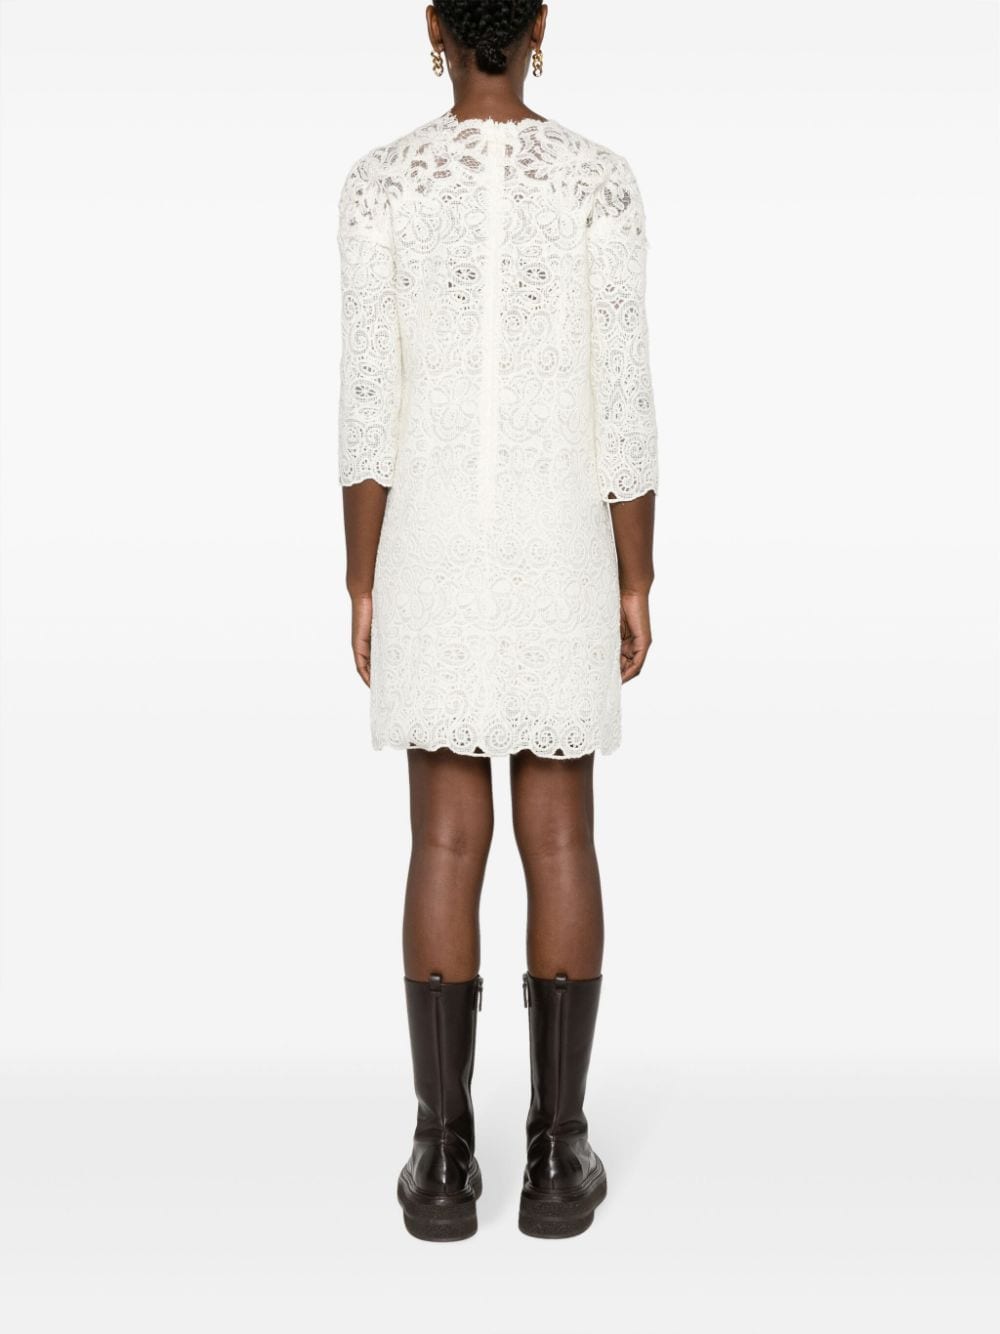 ERMANNO SCERVINO Chic and Sophisticated White Lace Dress